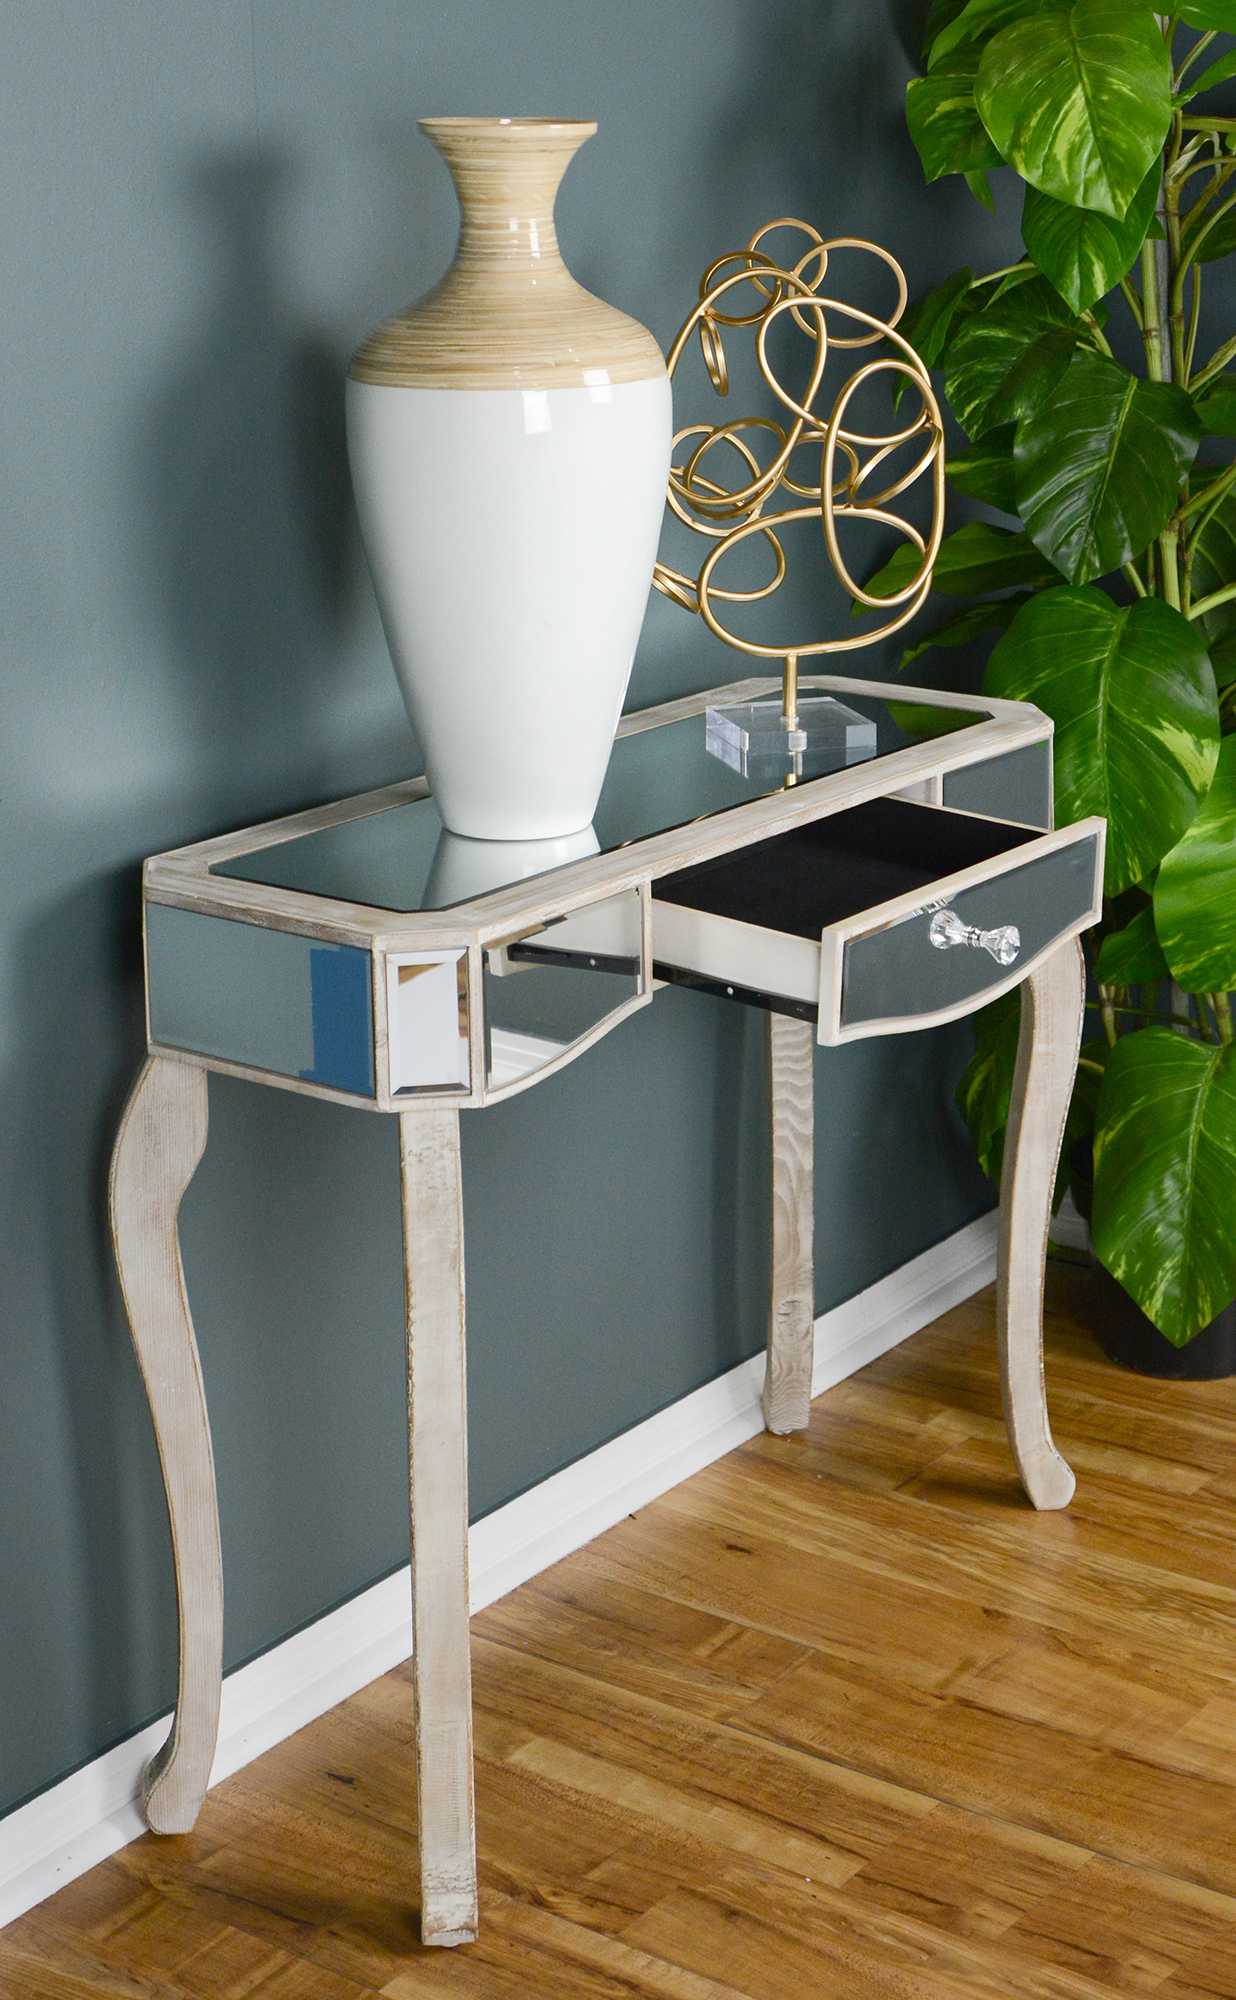 35.5" X 13" X 31" White Washed MDF Wood Mirrored Glass Console Table with Mirrored Glass Inserts and a Drawer